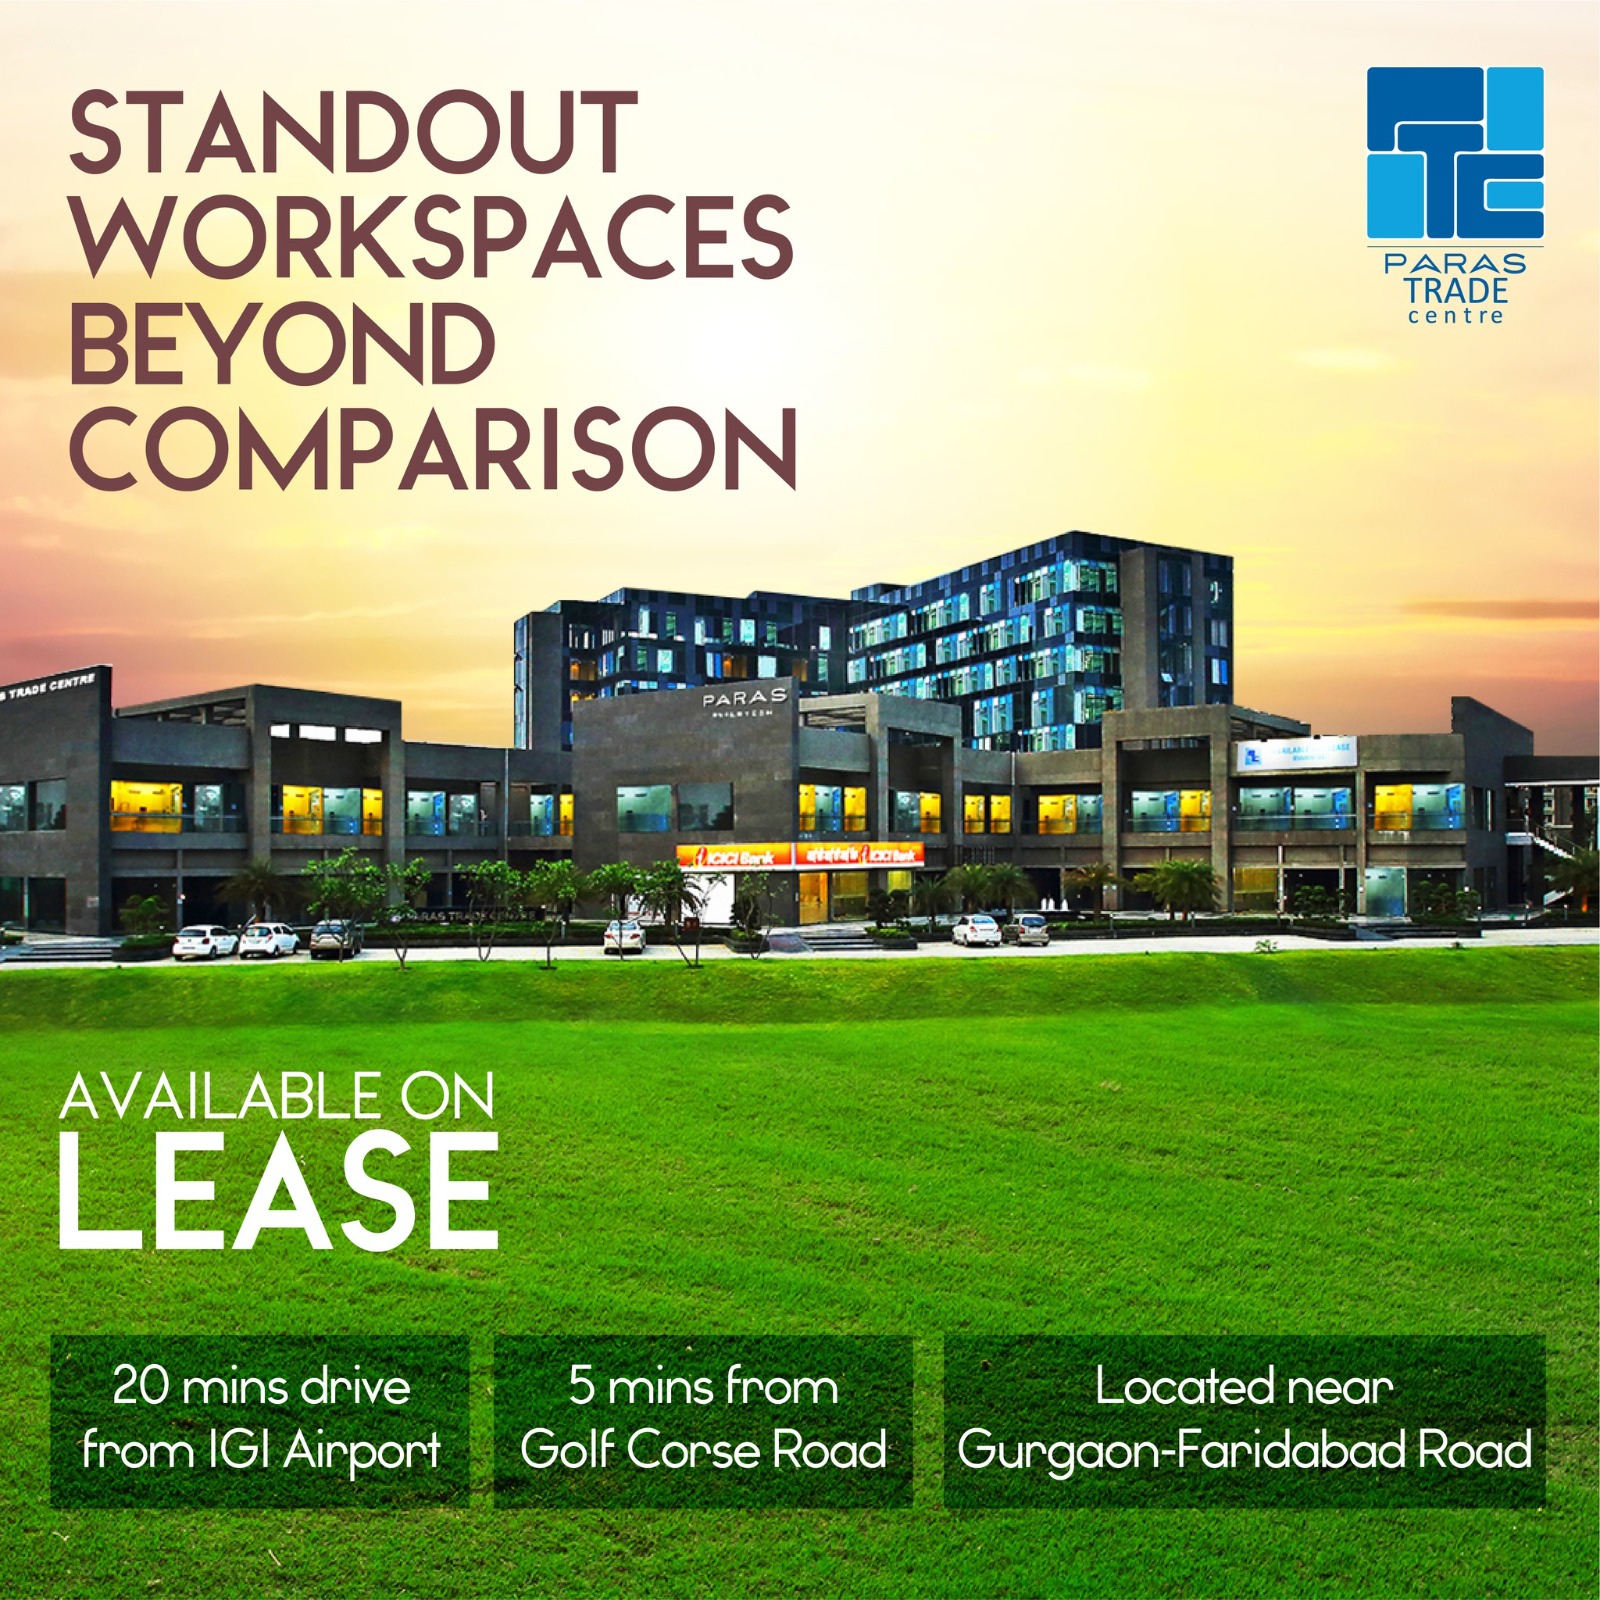 Paras Trade Centre: Premier Workspaces on Lease Near Gurgaon-Faridabad Road Update